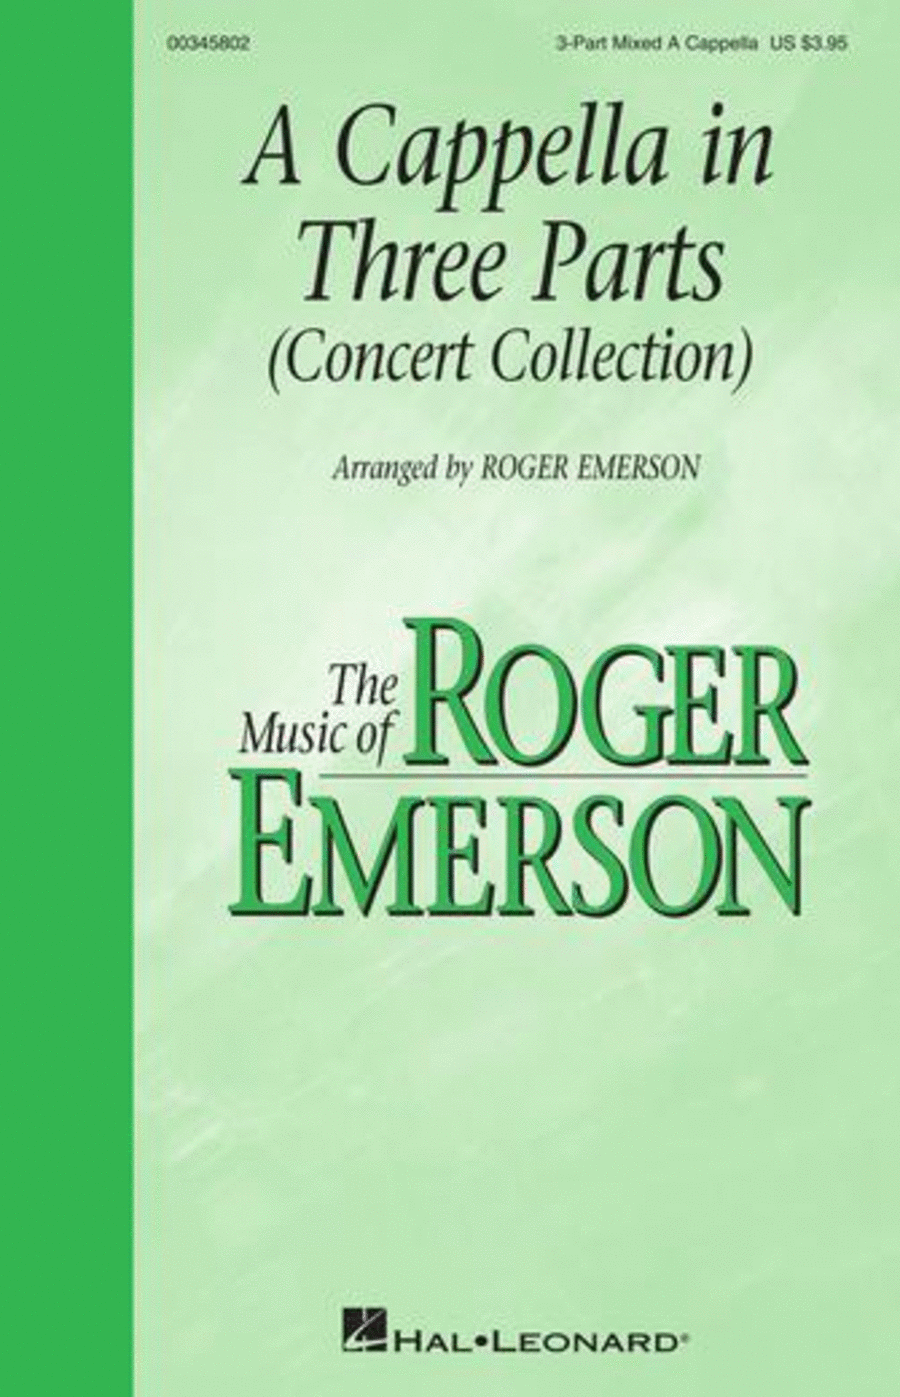 A Cappella in Three Parts (Concert Collection)